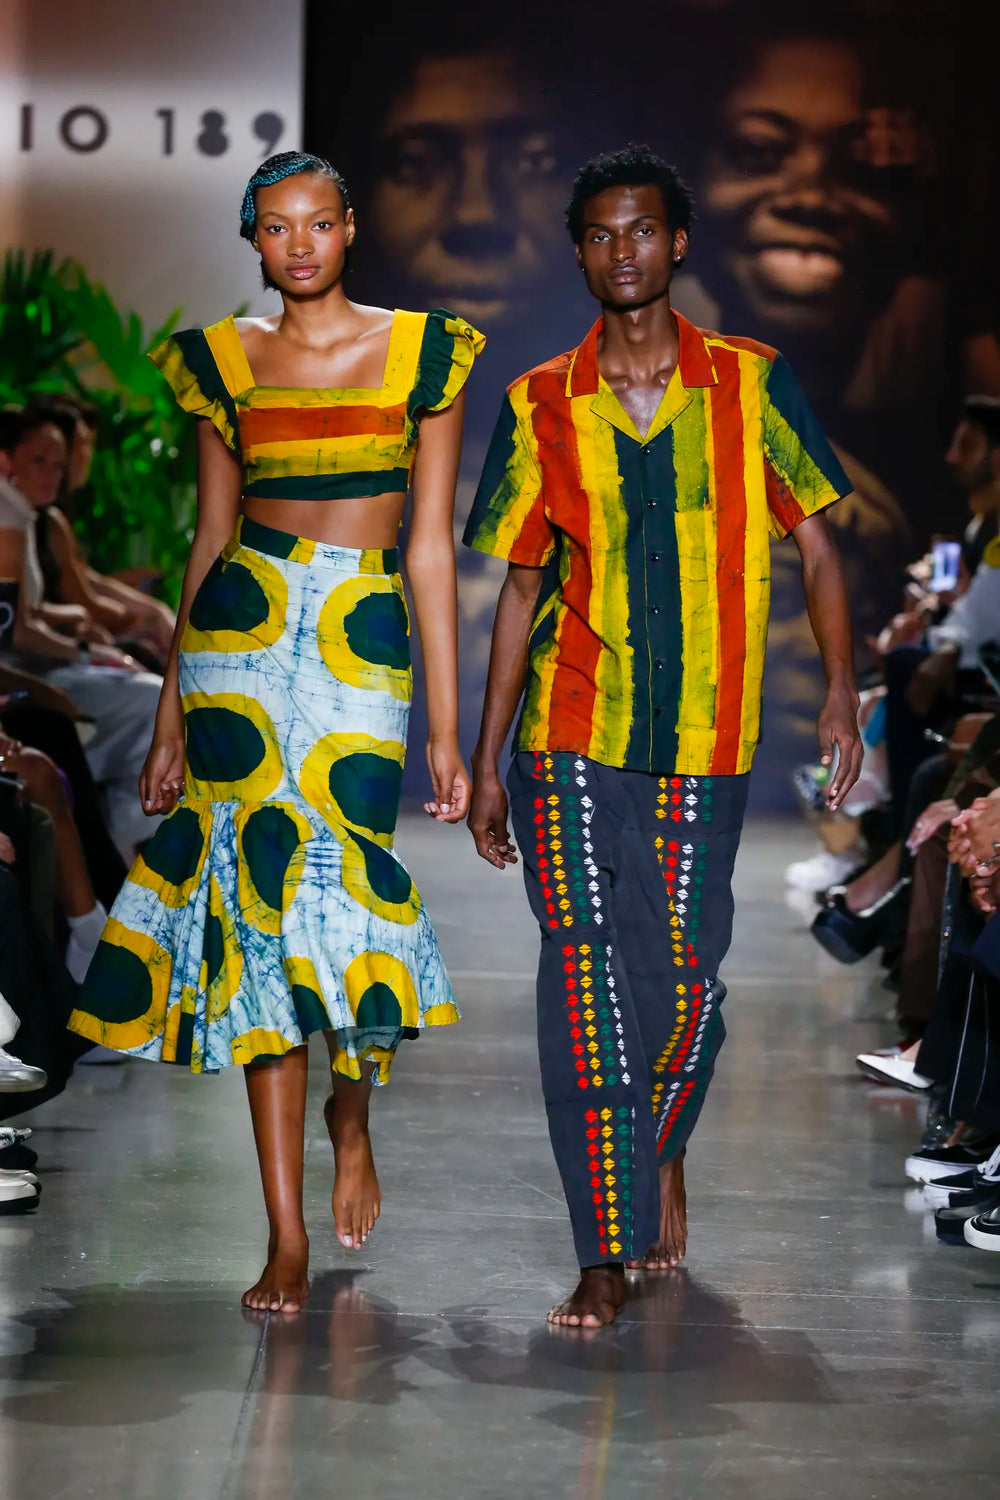 Ghana, Fashion, Africa, diaspora, cotton, dresses, GOWNS, skirts, shirts, tops, womenswear, womens, Handmade, bag, West Africa, Gift, travel, vacation, beach, picnic, pool, swim, sand, family, trip, luxury, resort, spring, summer, concert, gala, event, party, brunch, chic, custom, bespoke, plus-sized, extended sizes, inclusivity, celebration, special, cotton, packable, luxury, accessible, new, novelty, classic, professor, academia, Africana